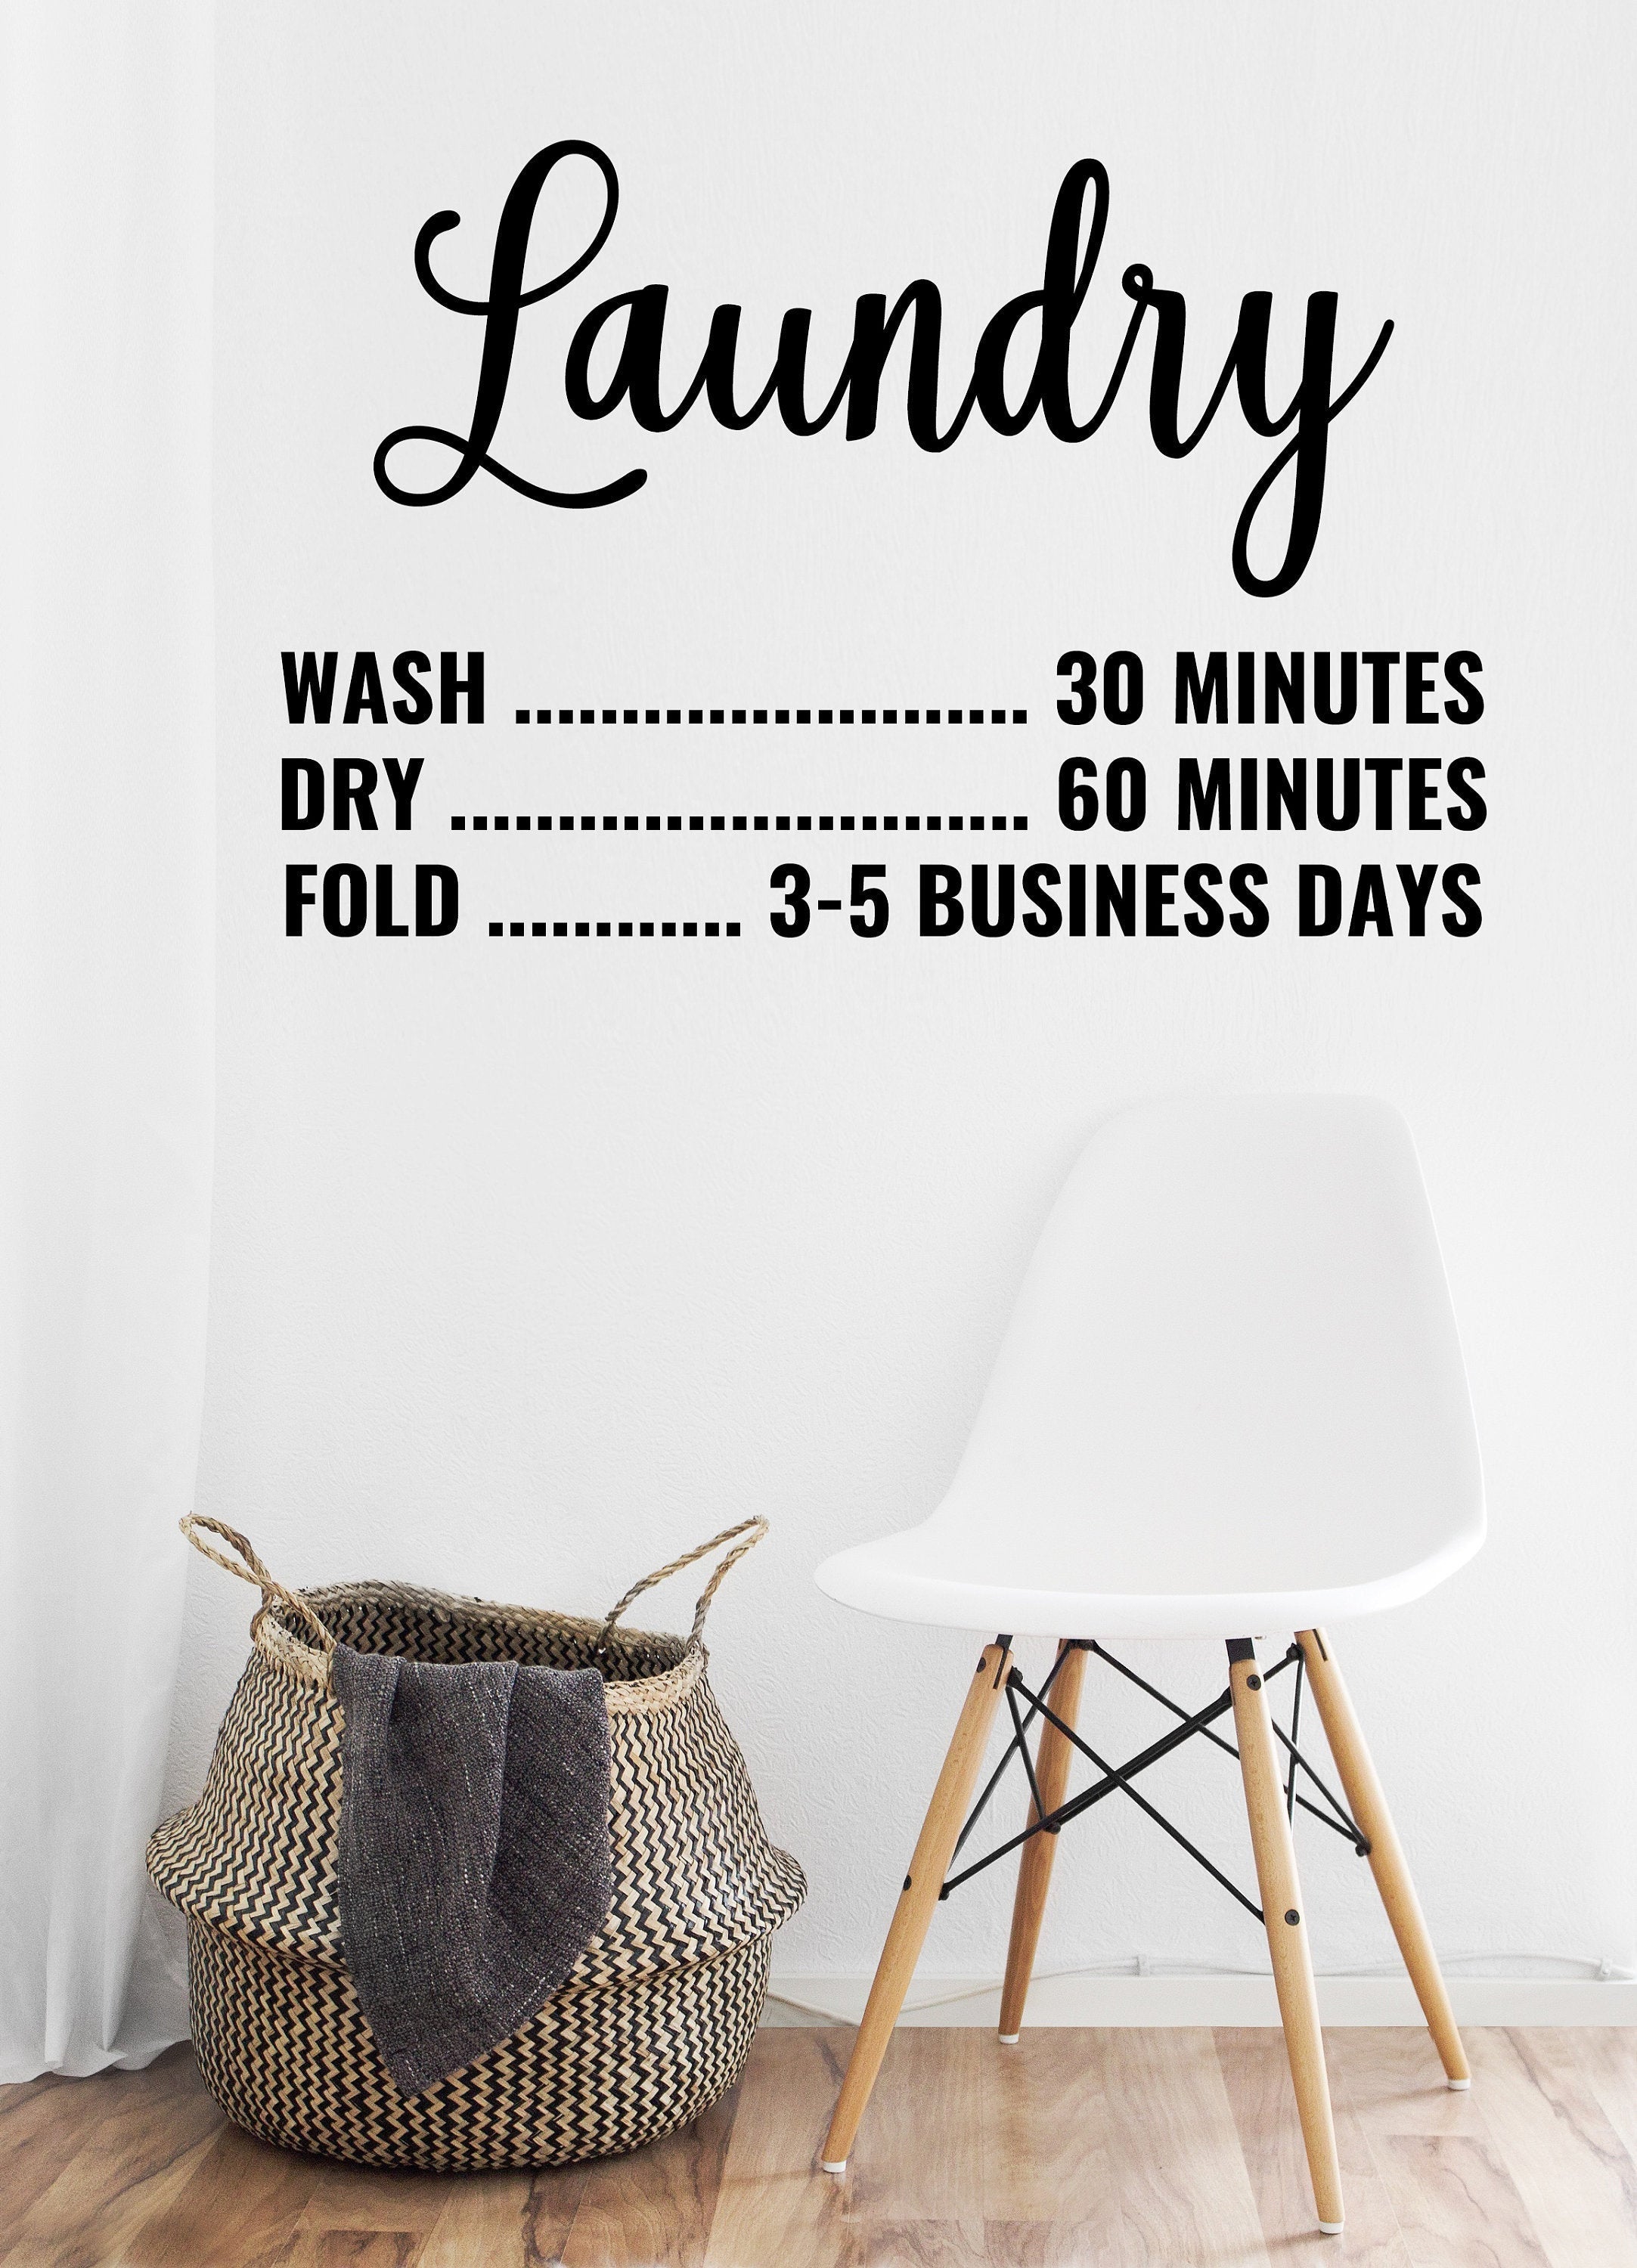 Laundry Wash Dry Fold - Vinyl Decal for Laundry Room, Kitchen, Walls, Homes and More!